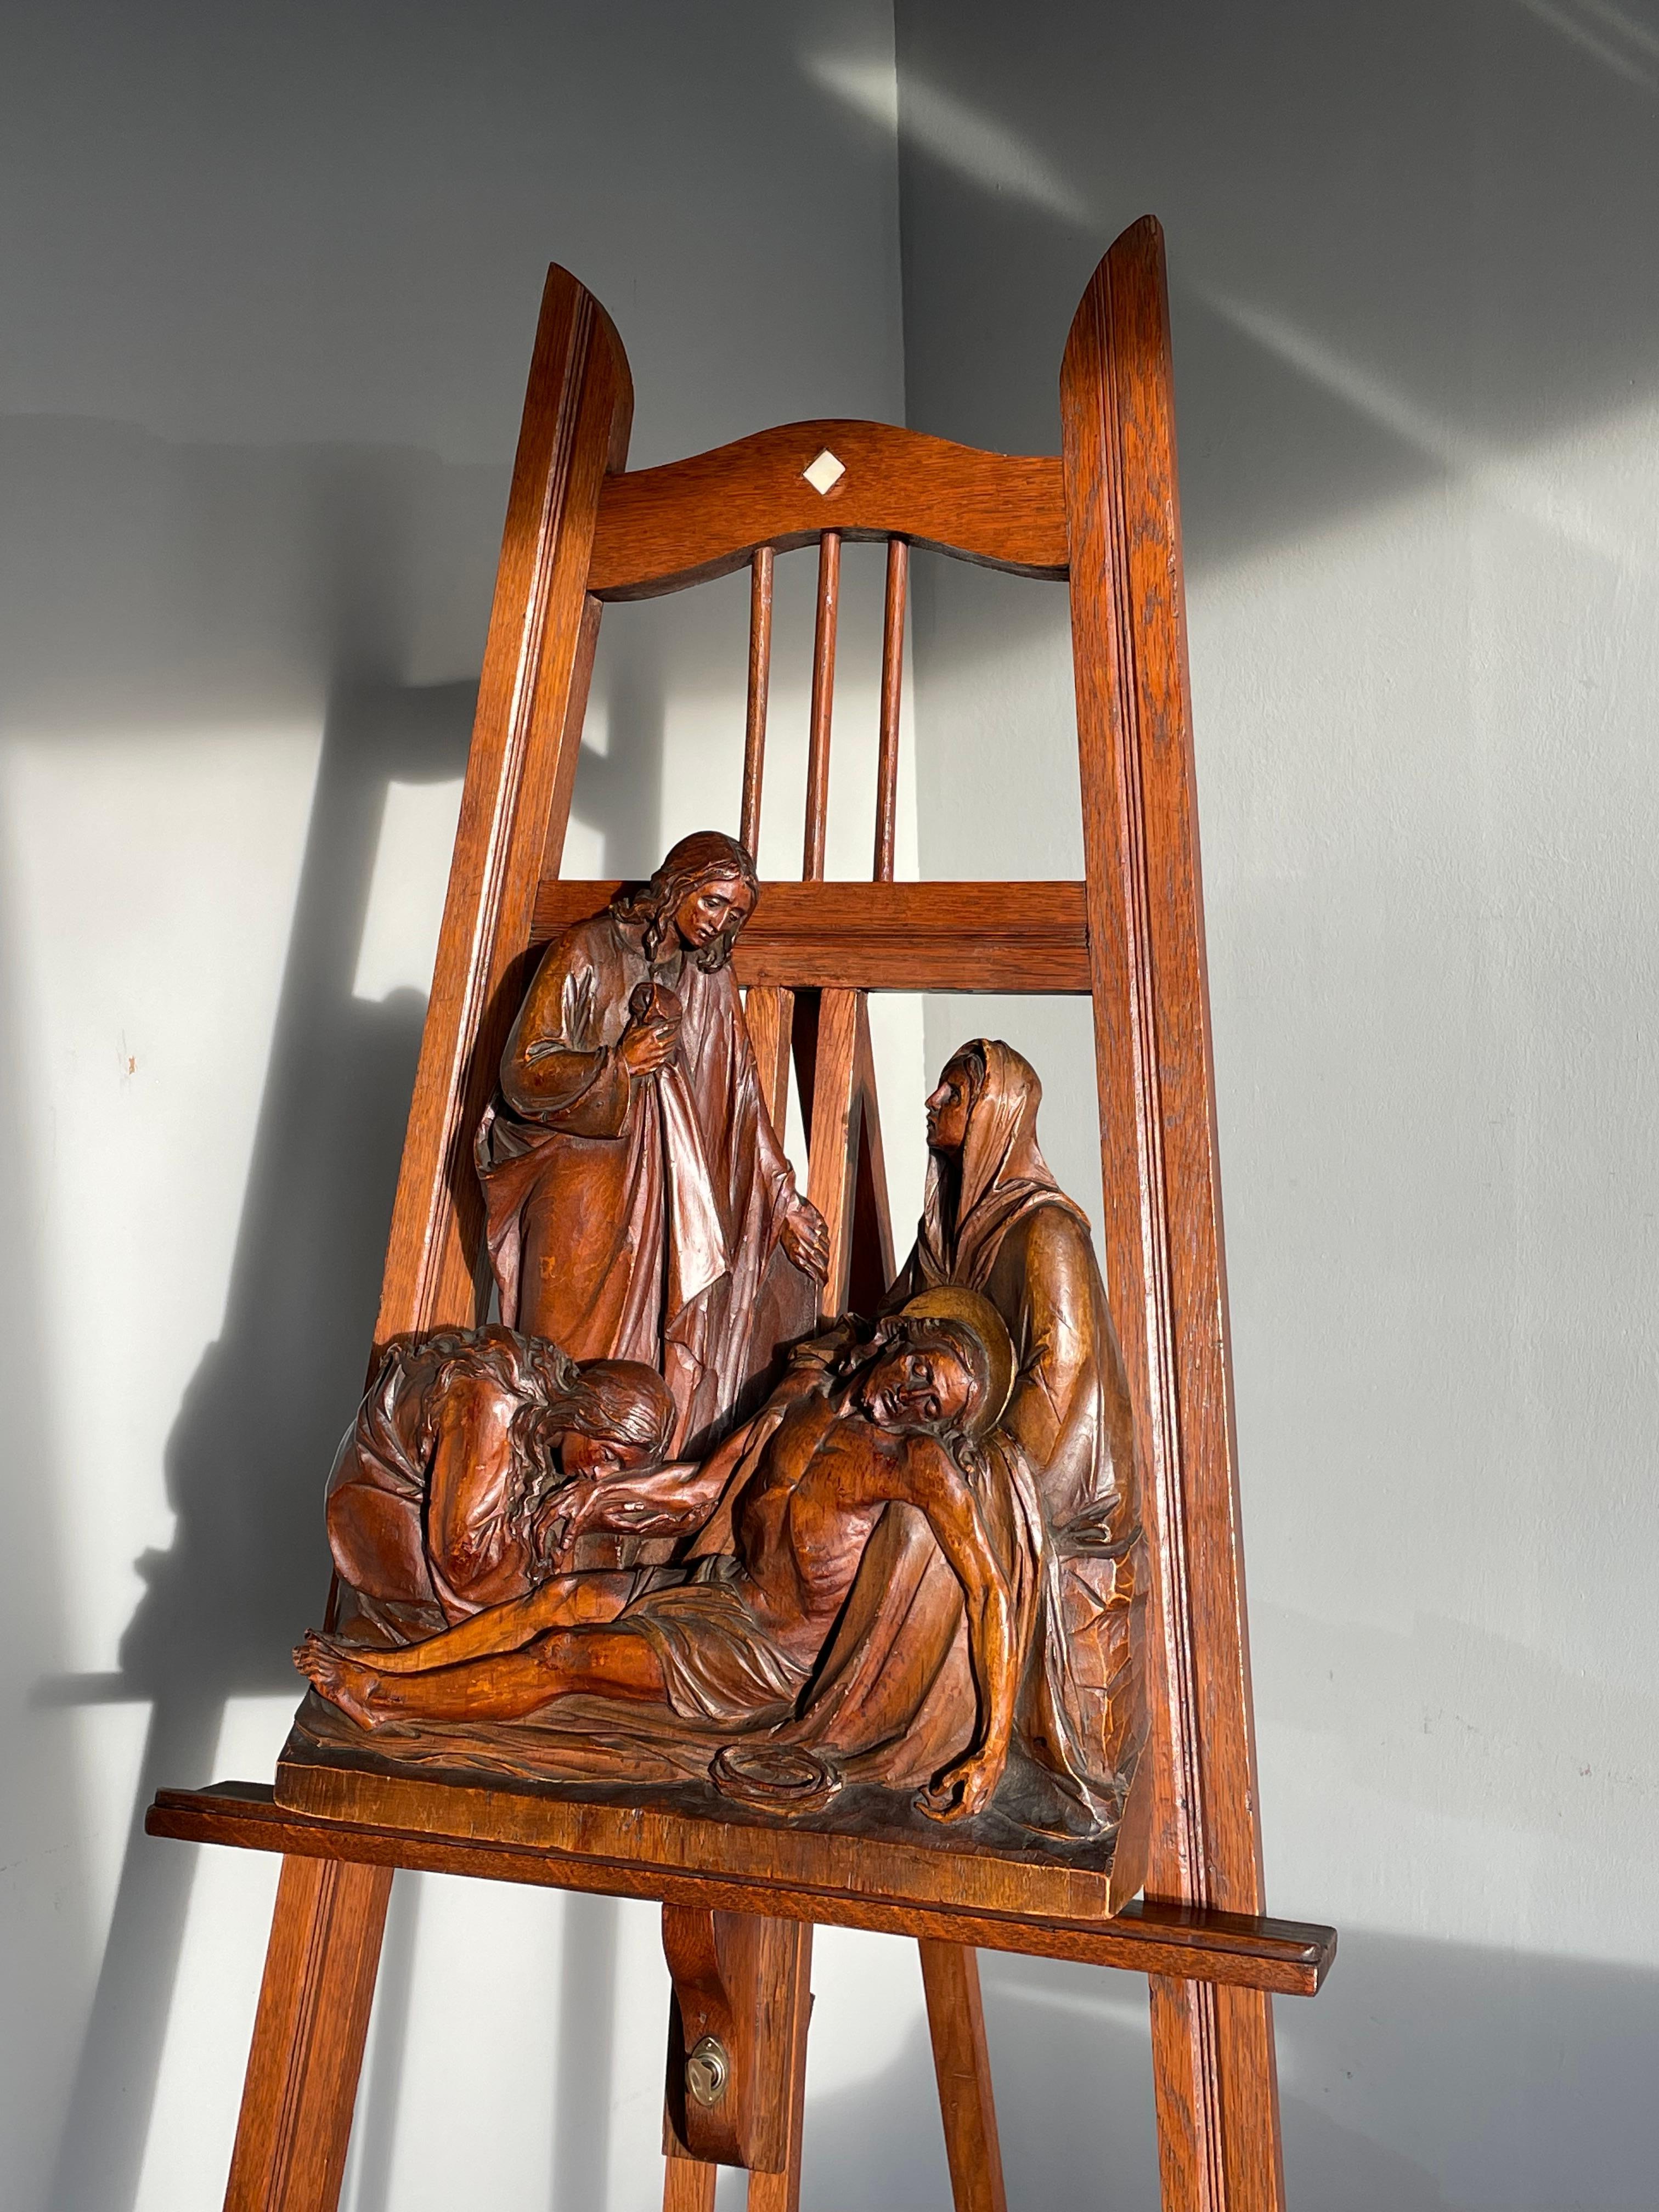 Hand-Carved Handmade Dutch Arts and Crafts Solid Oak Floor Easel / Painting Display Stand For Sale